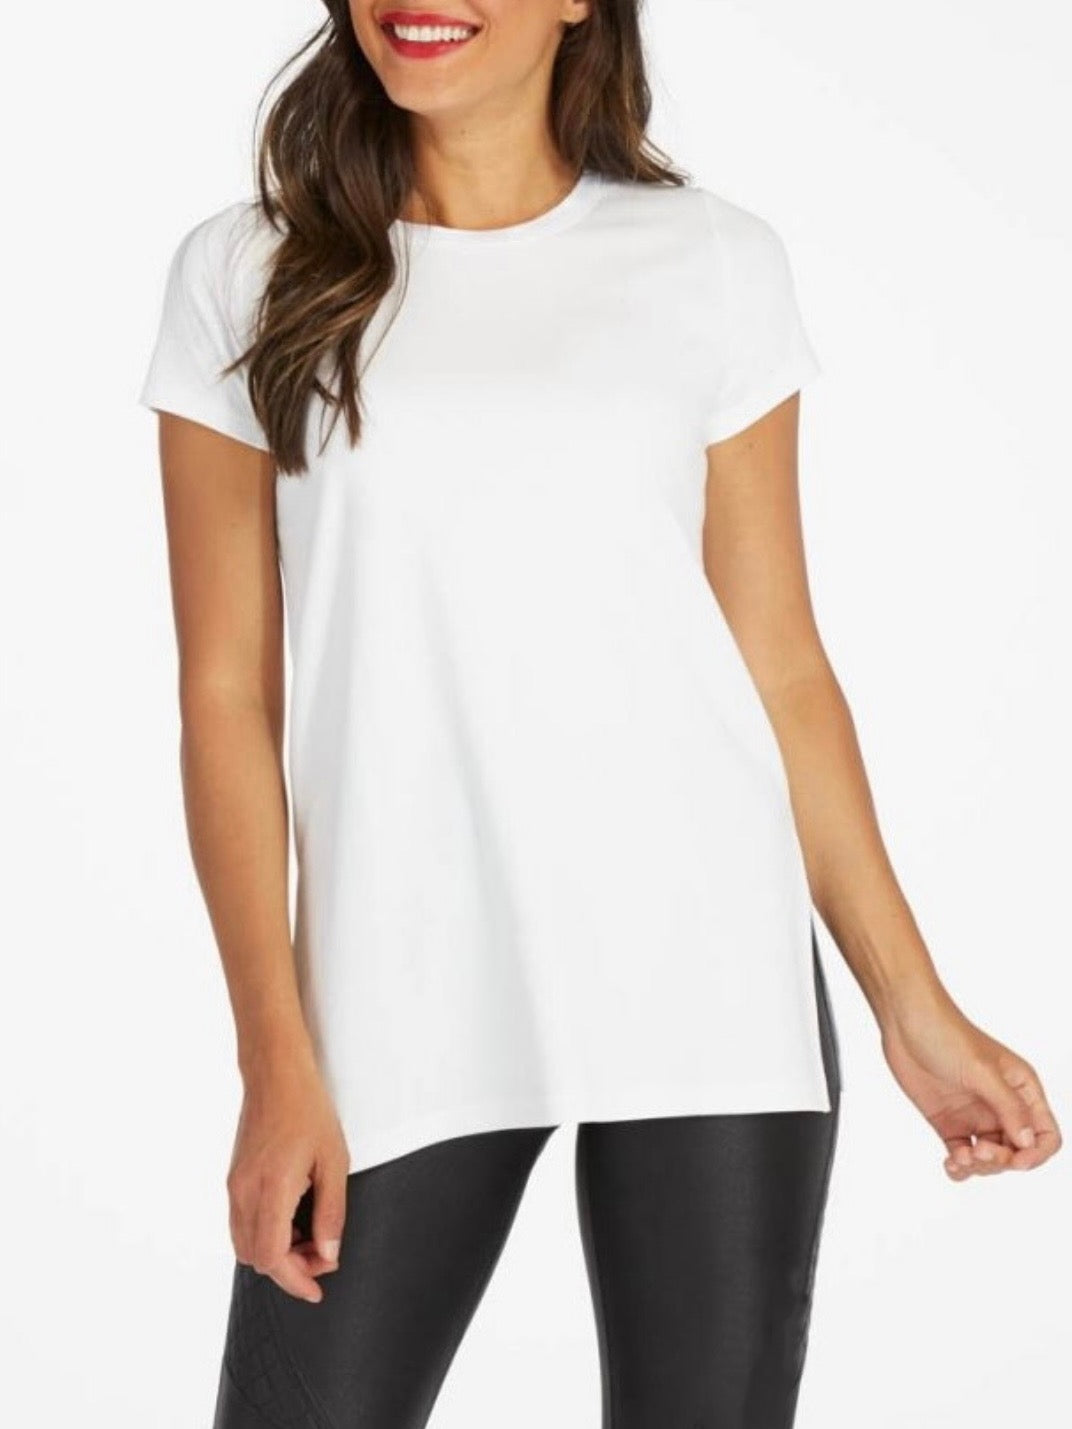 Spanx – Tagged comfortable– Hip Chics Boutique